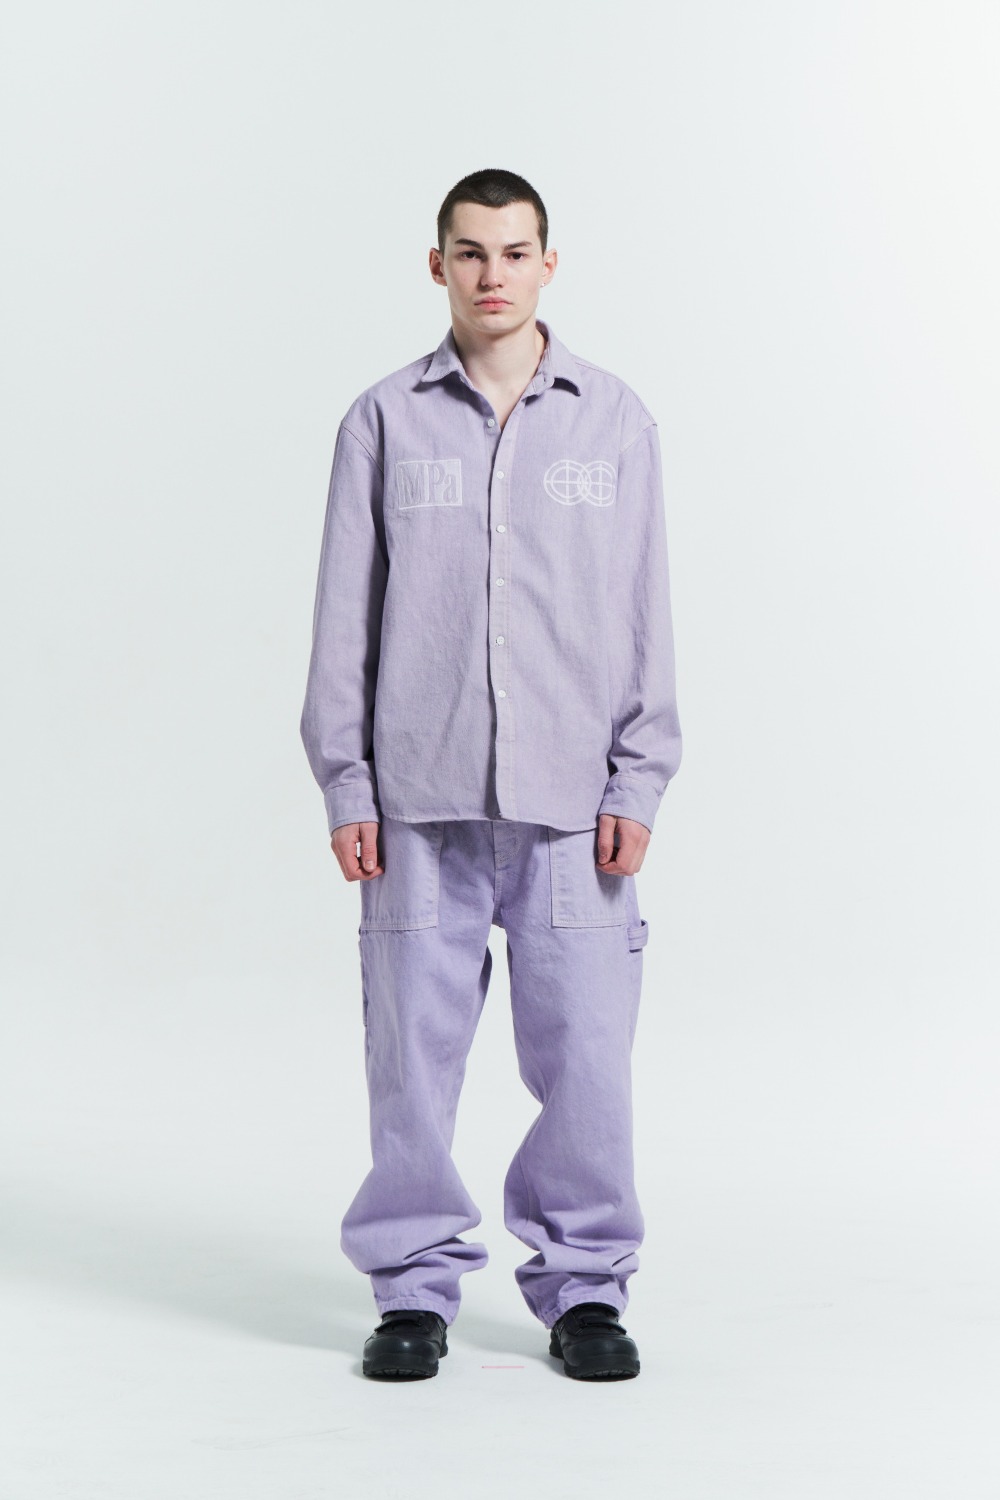 MPa DENIM SHIRTS (LAVENDER) Sequential Shipping on 2/29